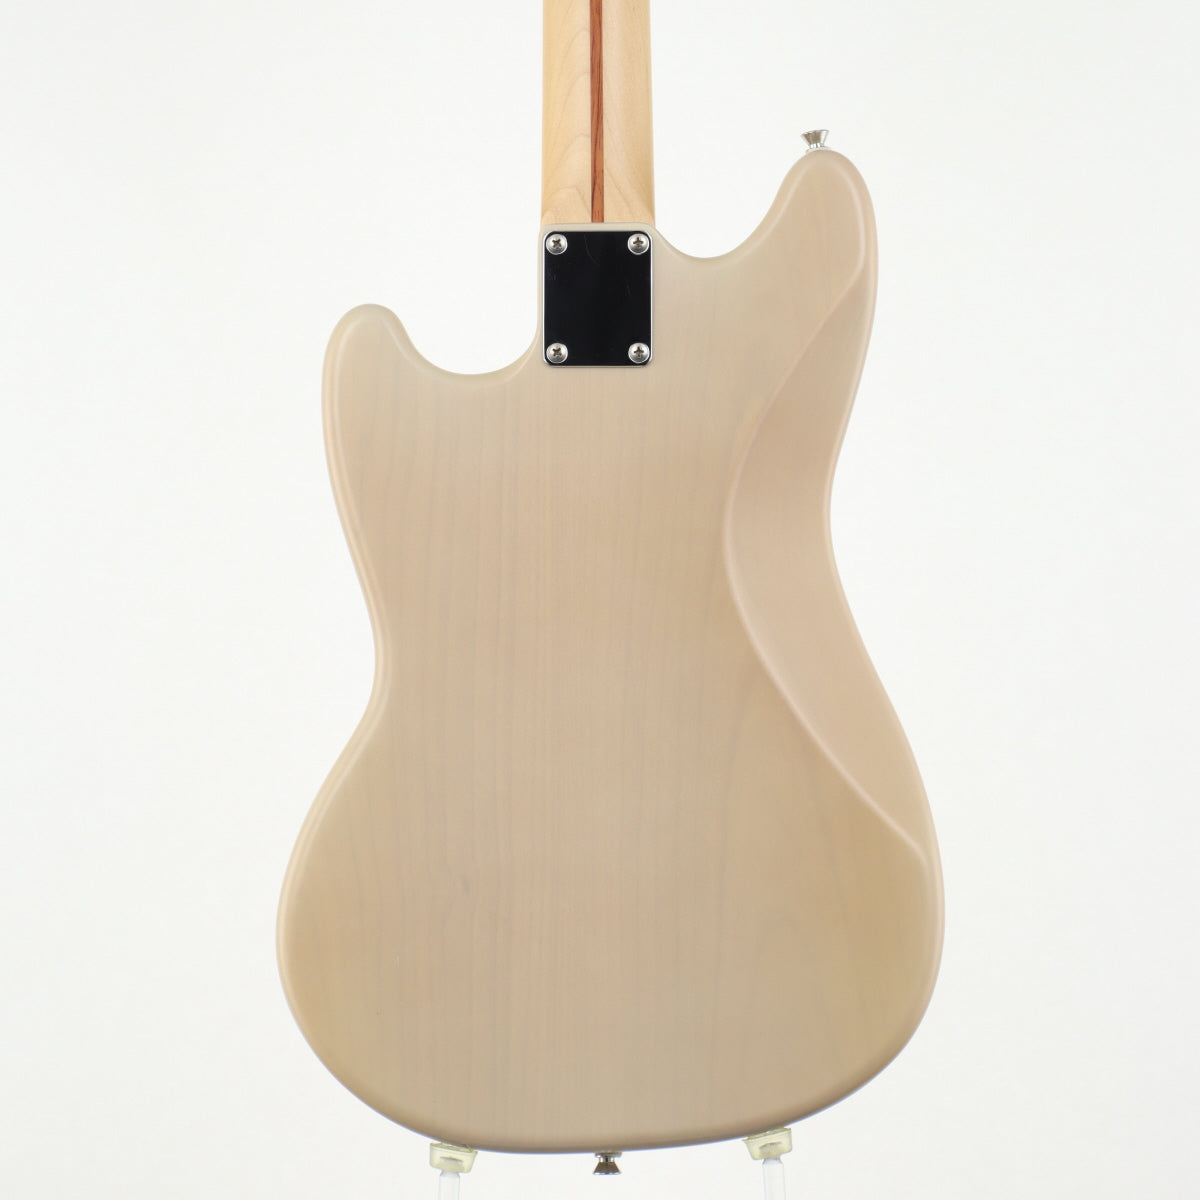 [SN A110165] USED Fujigen / ANMG-10R MOD White Blonde [11]